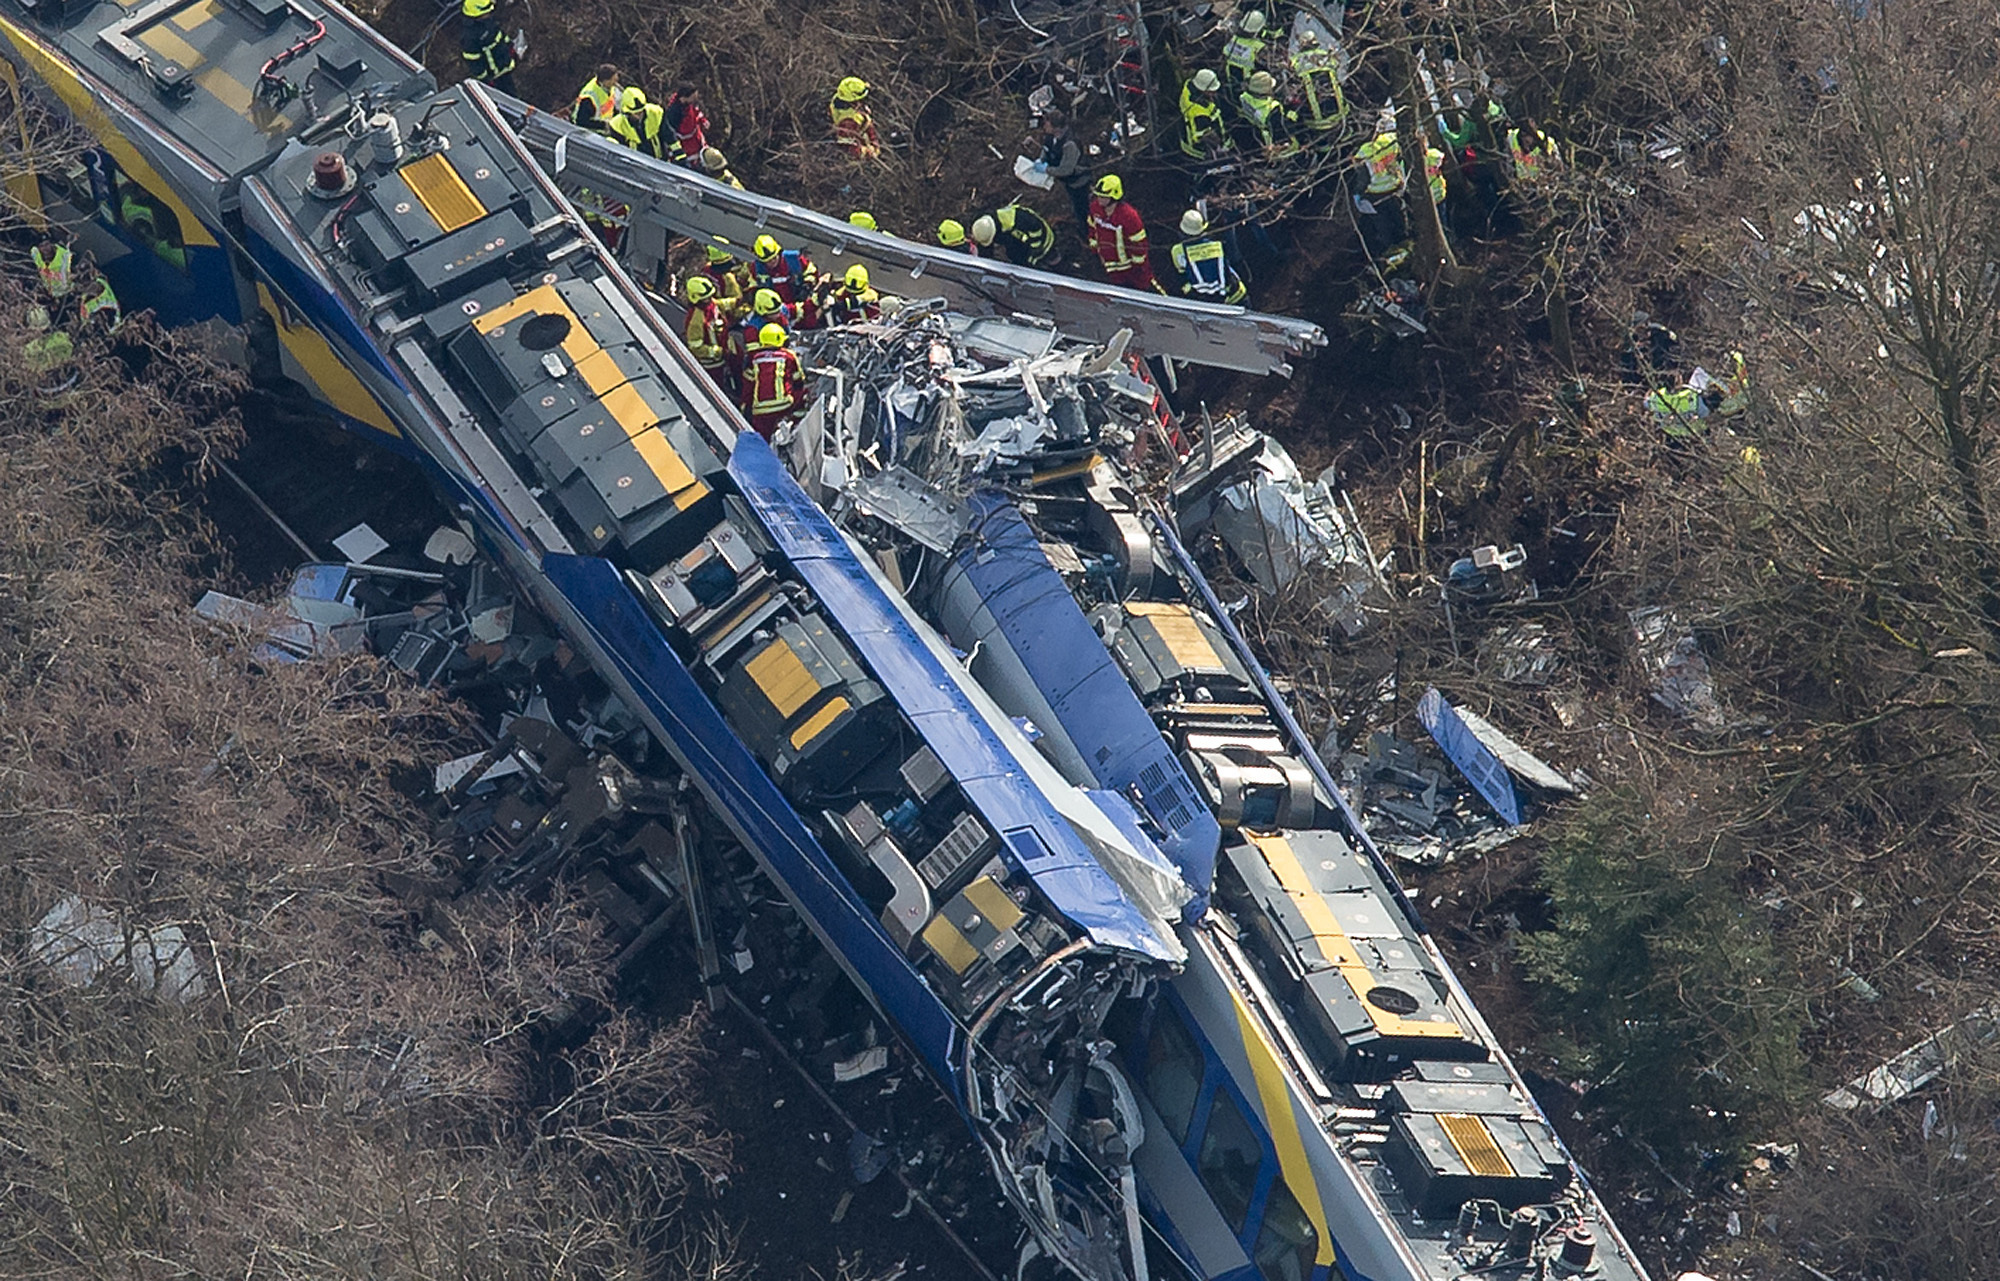 PHOTO: Aerial view shows firefighters and emergency doctors working at the site of a train accident near Bad Aibling, Germany, Feb. 9, 2016.